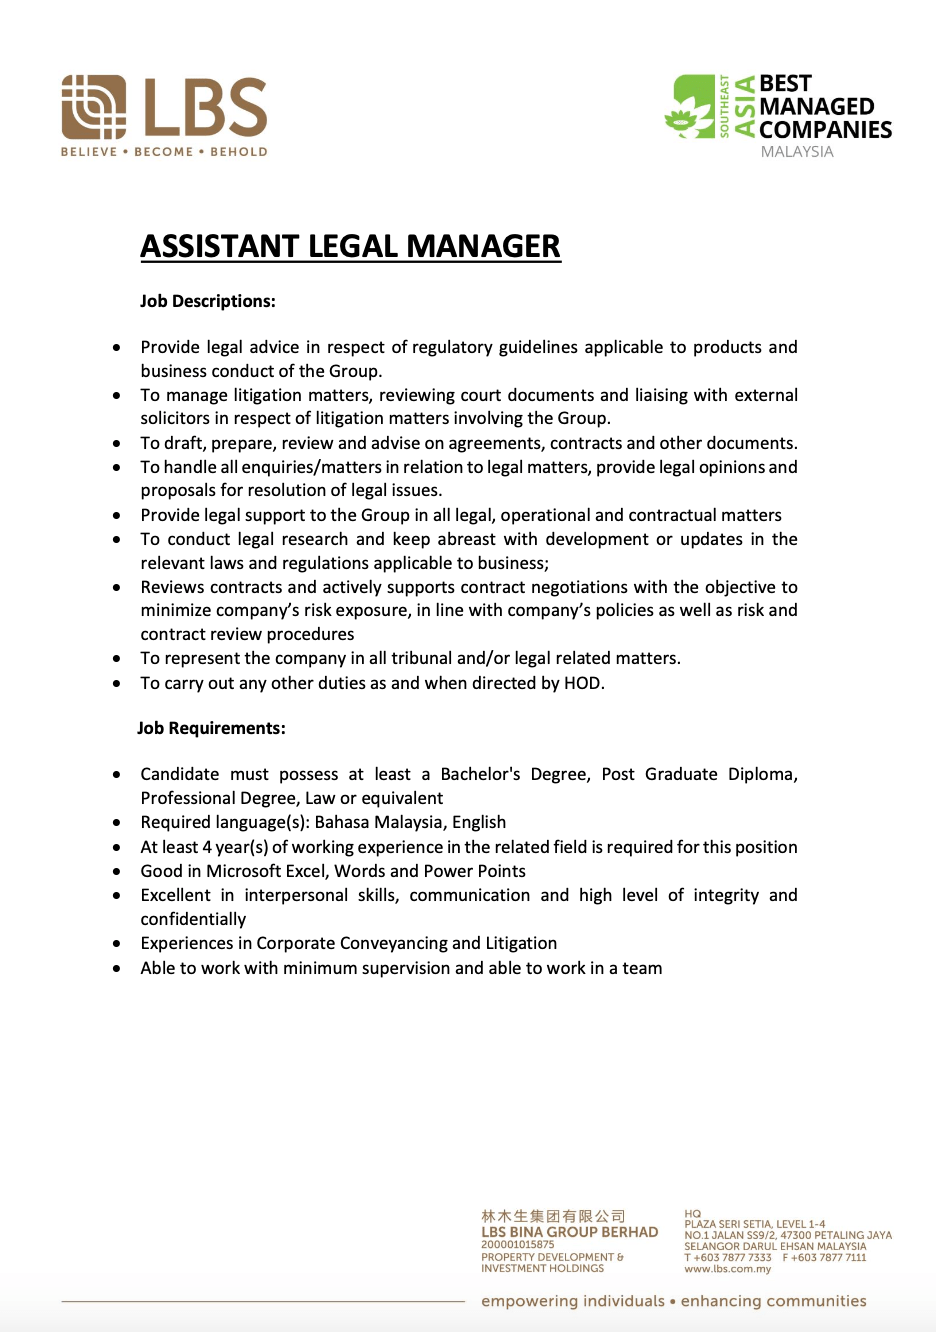 Assistant Legal Manager